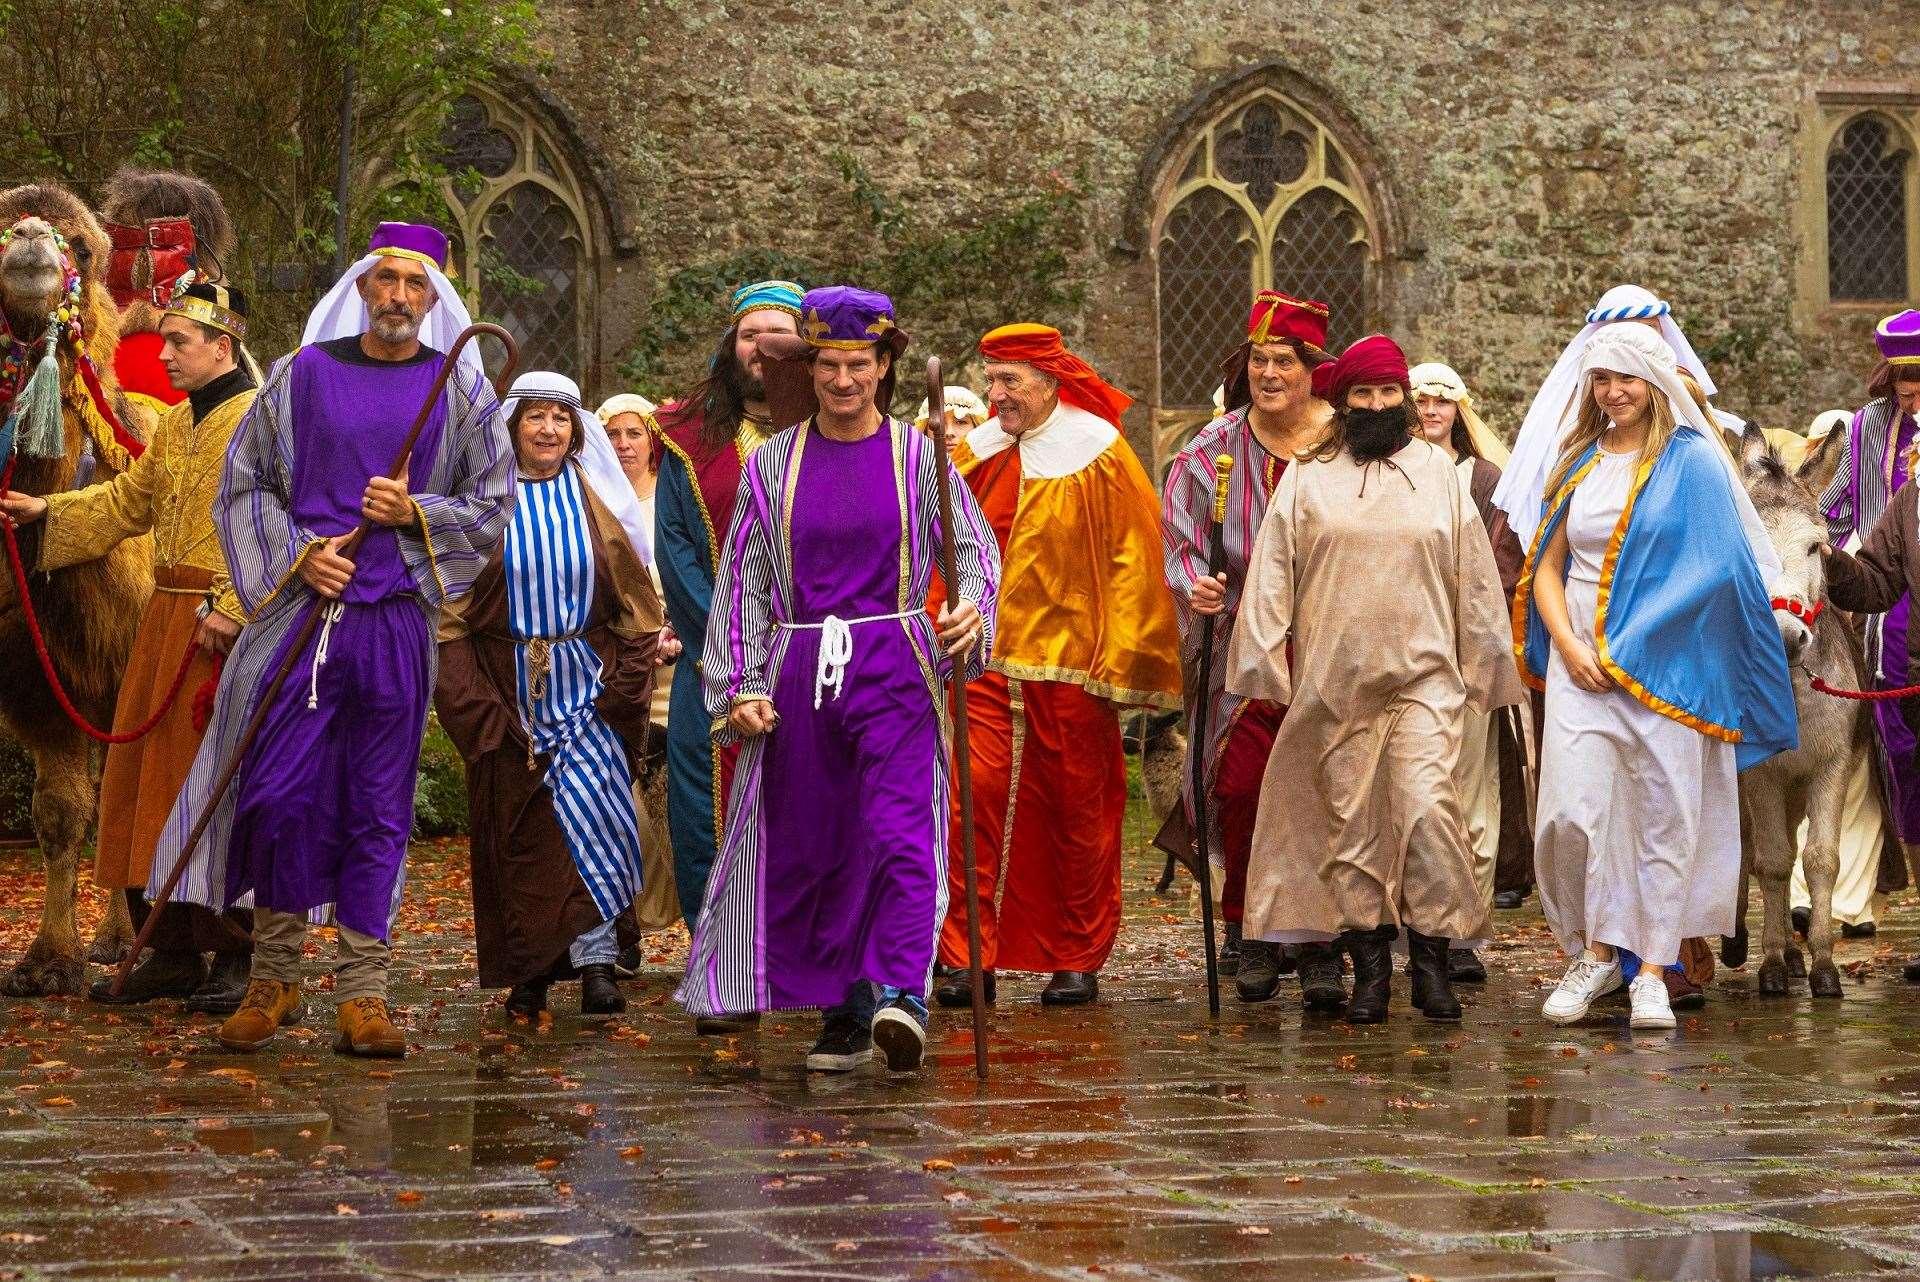 Actors portraying Mary and Joseph, wise men and shepherds will also take part in the procession. Picture: Barret Kaplan